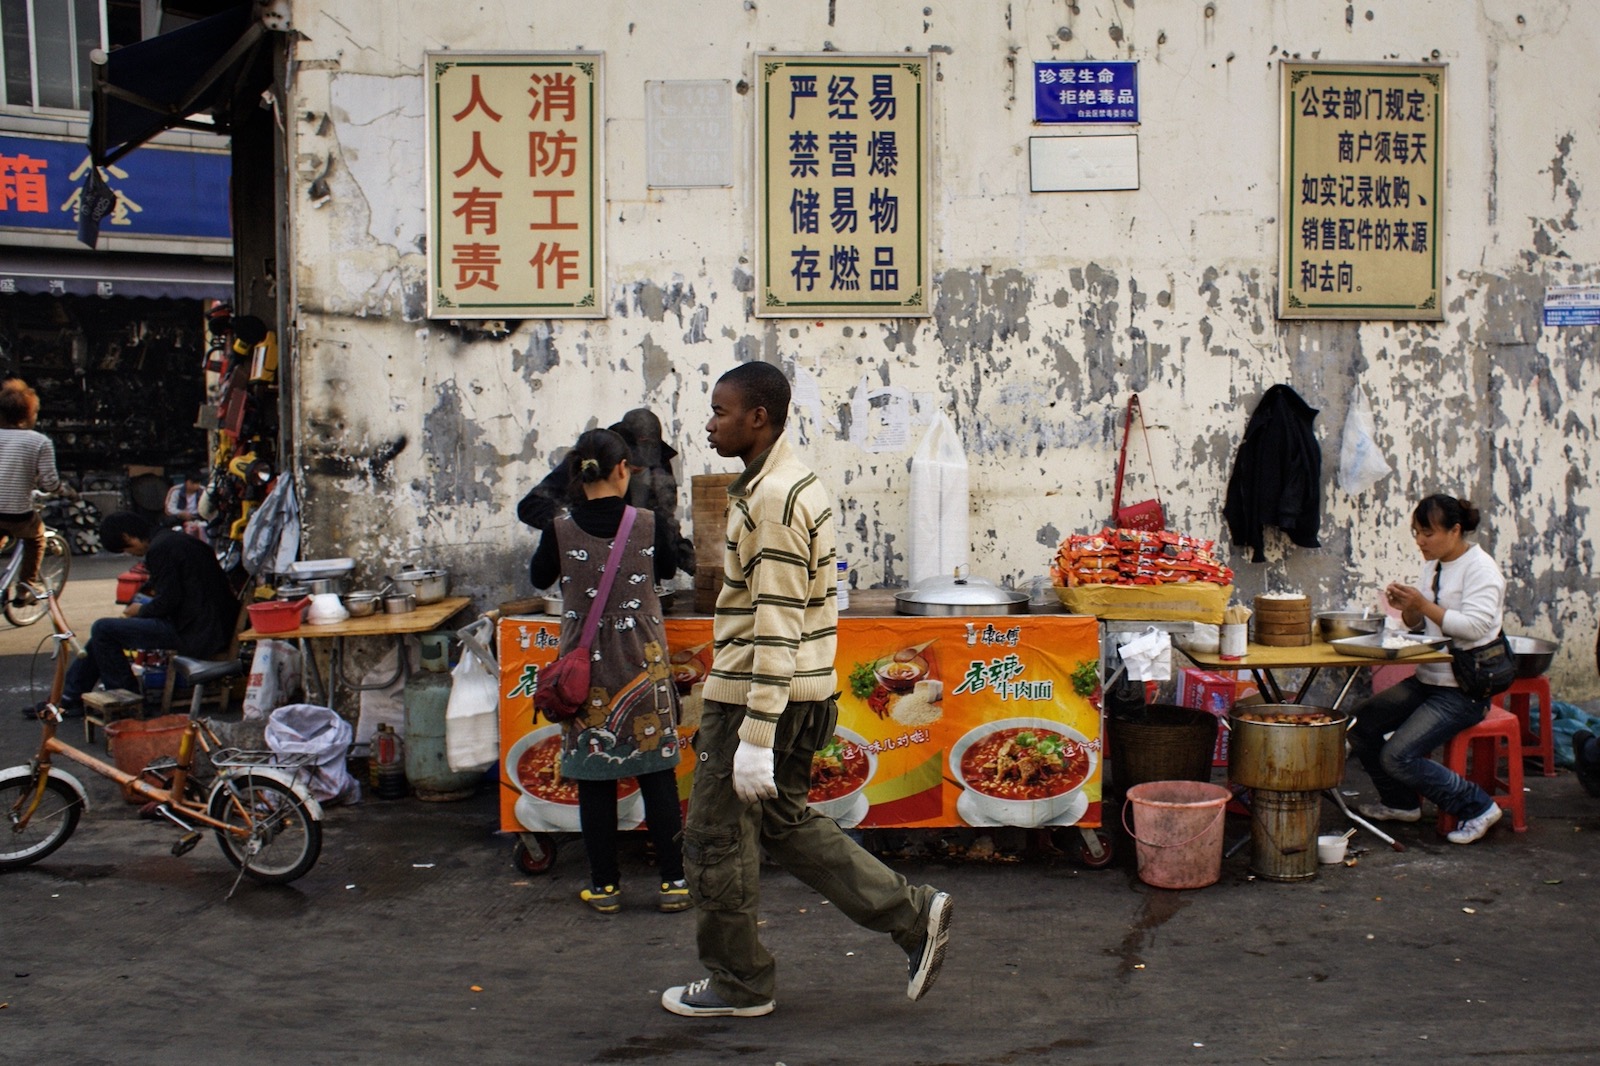 A Lost ‘Little Africa’: How China, Too, Blames Foreigners for the Virus